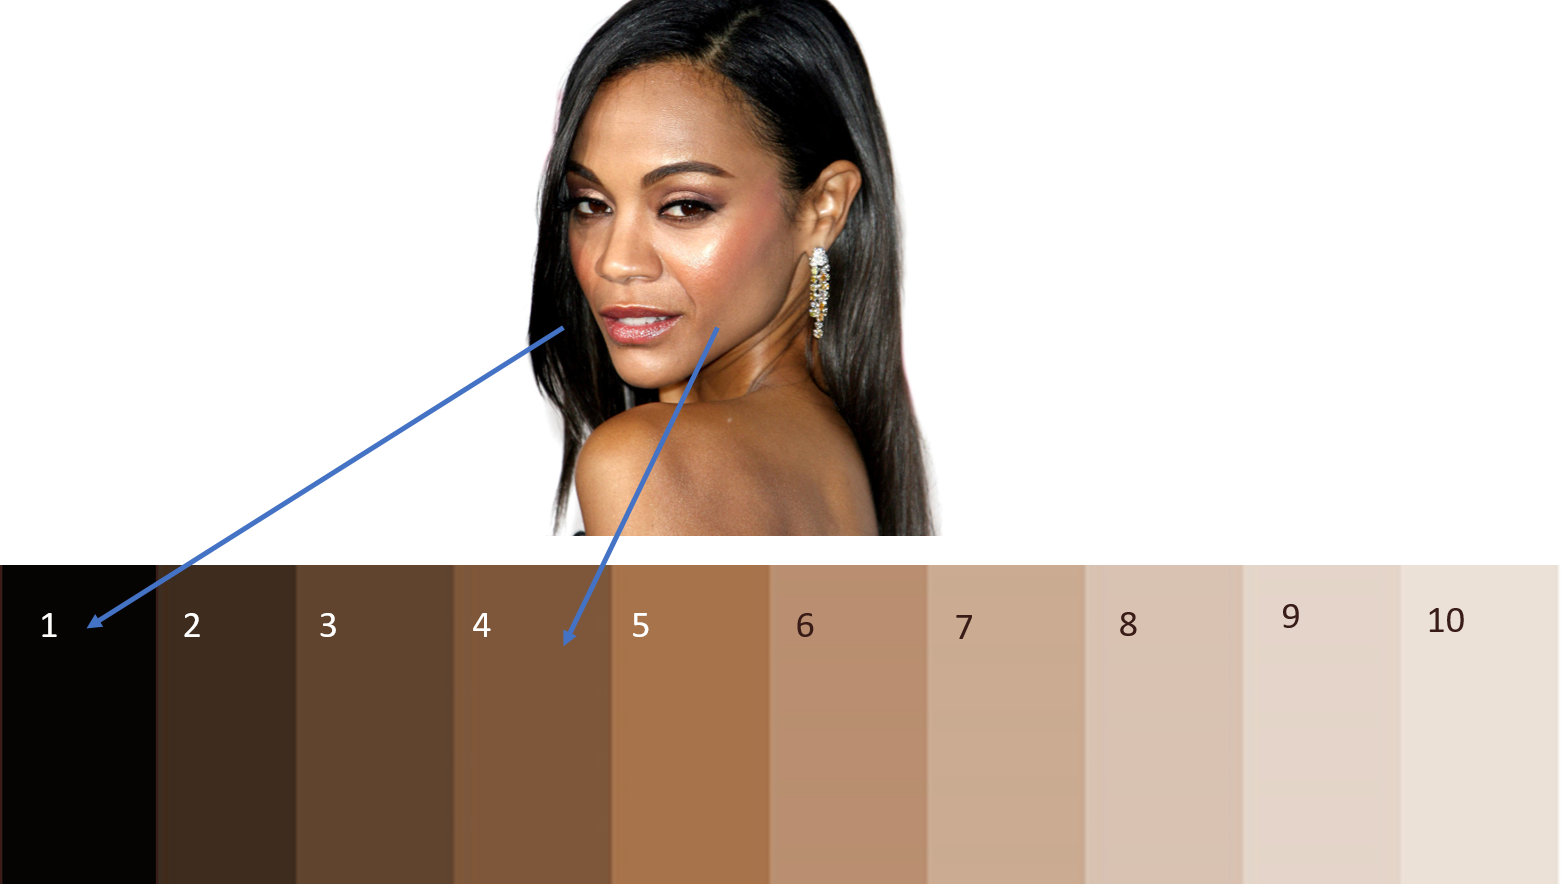 Understanding value, colour contrast and value contrast with darker skin tones